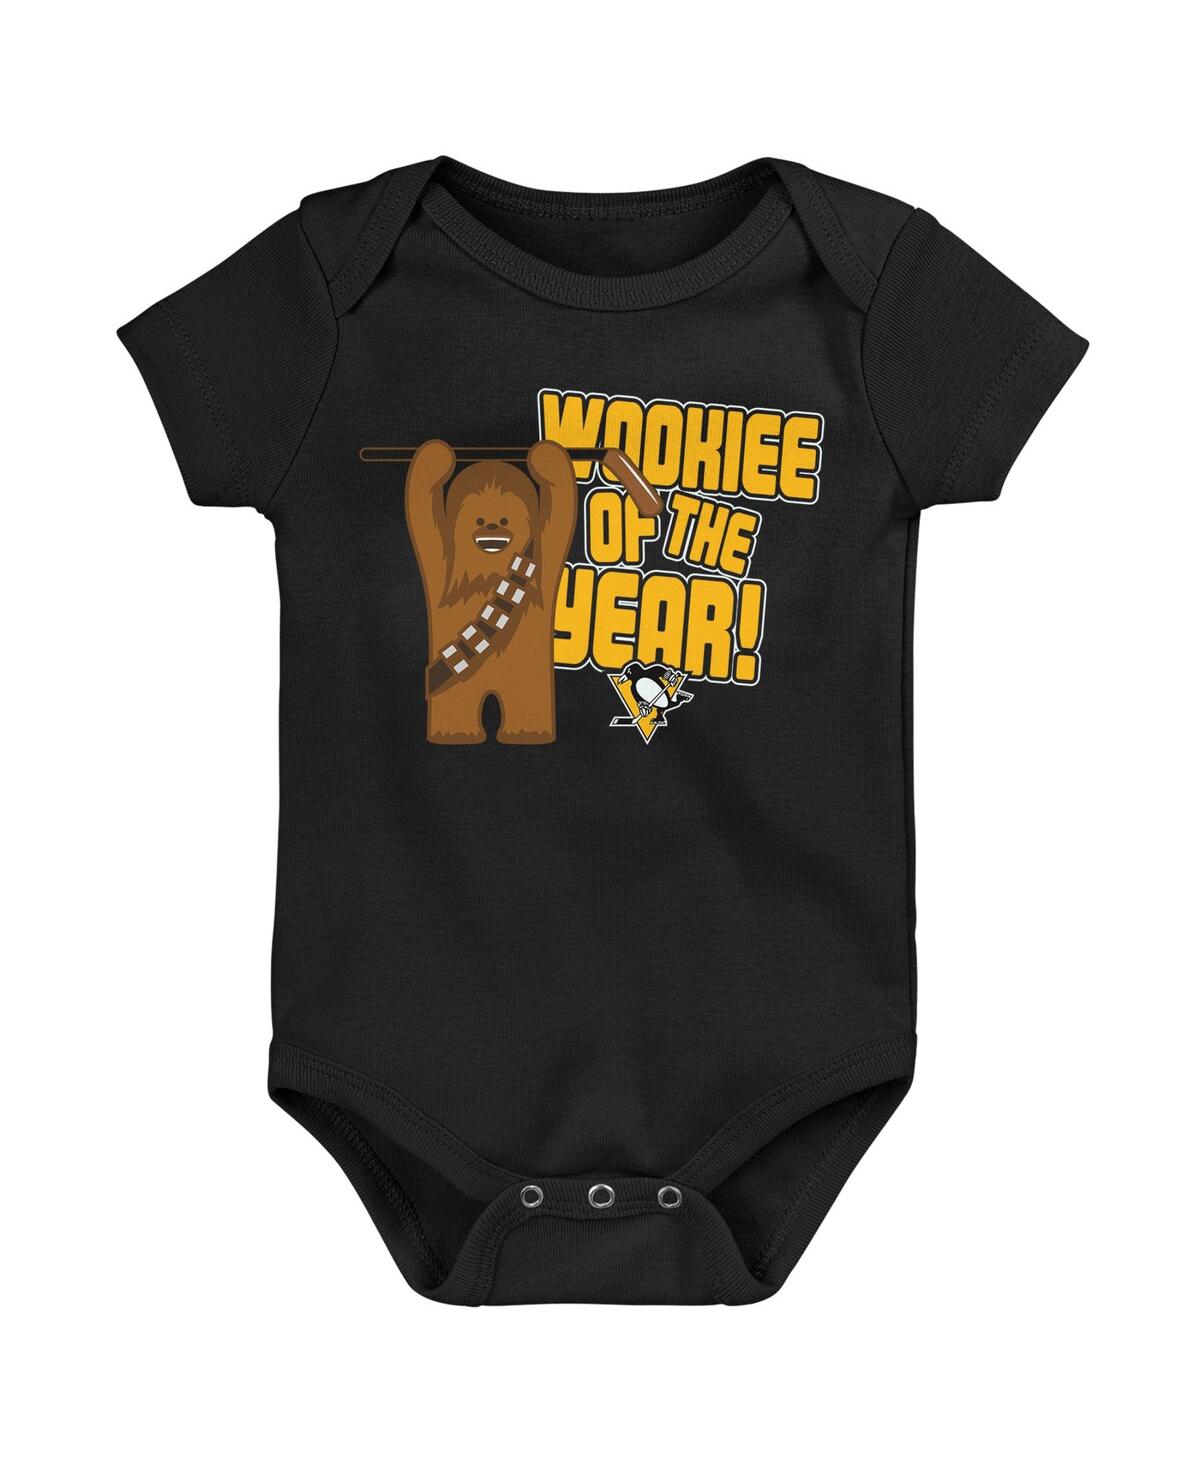 Shop Outerstuff Infant Boys And Girls Black Pittsburgh Penguins Star Wars Wookie Of The Year Bodysuit